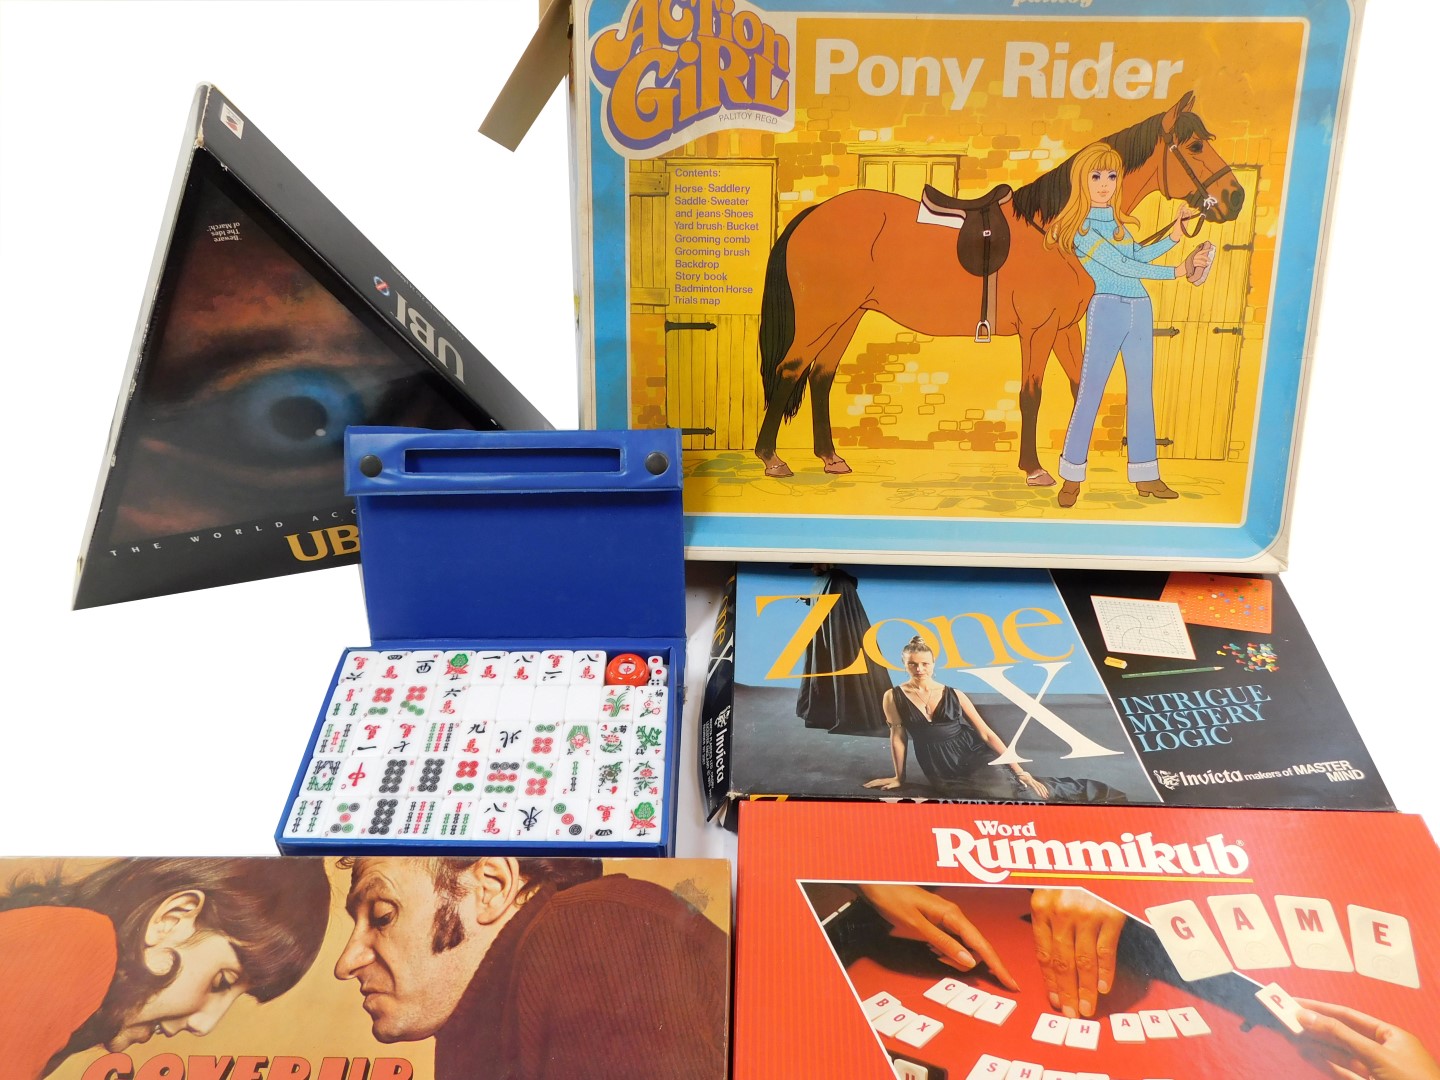 Games and toys, including Action Girl pony rider, Zone X, UBI, and Mahjong. (6)